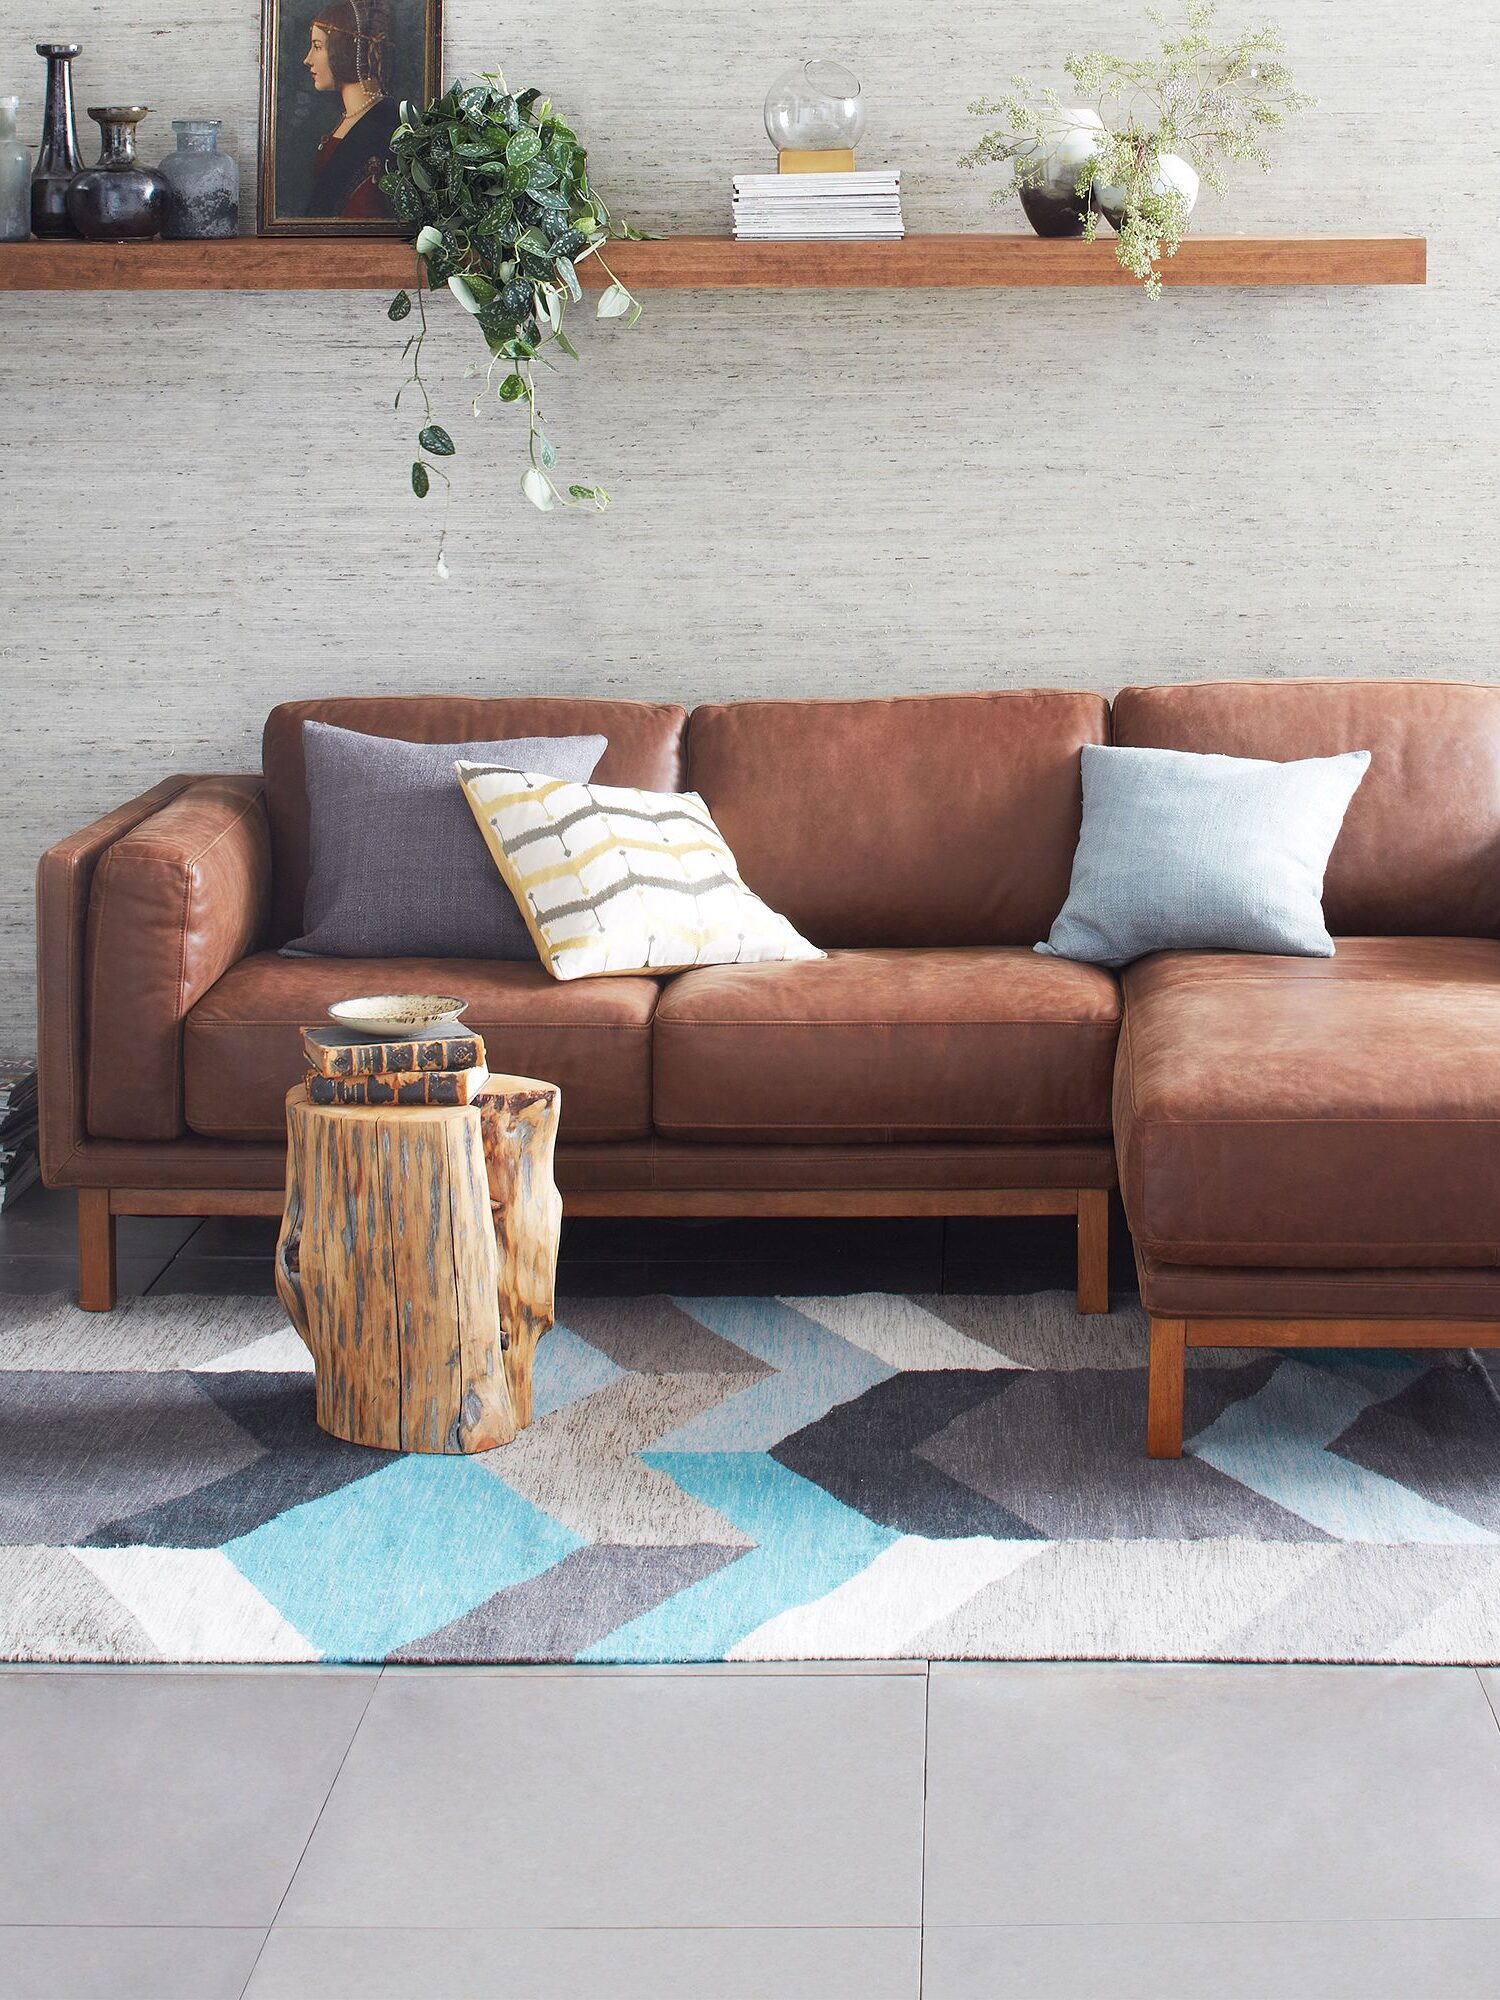 A brown leather West Elm sectional in a living room.